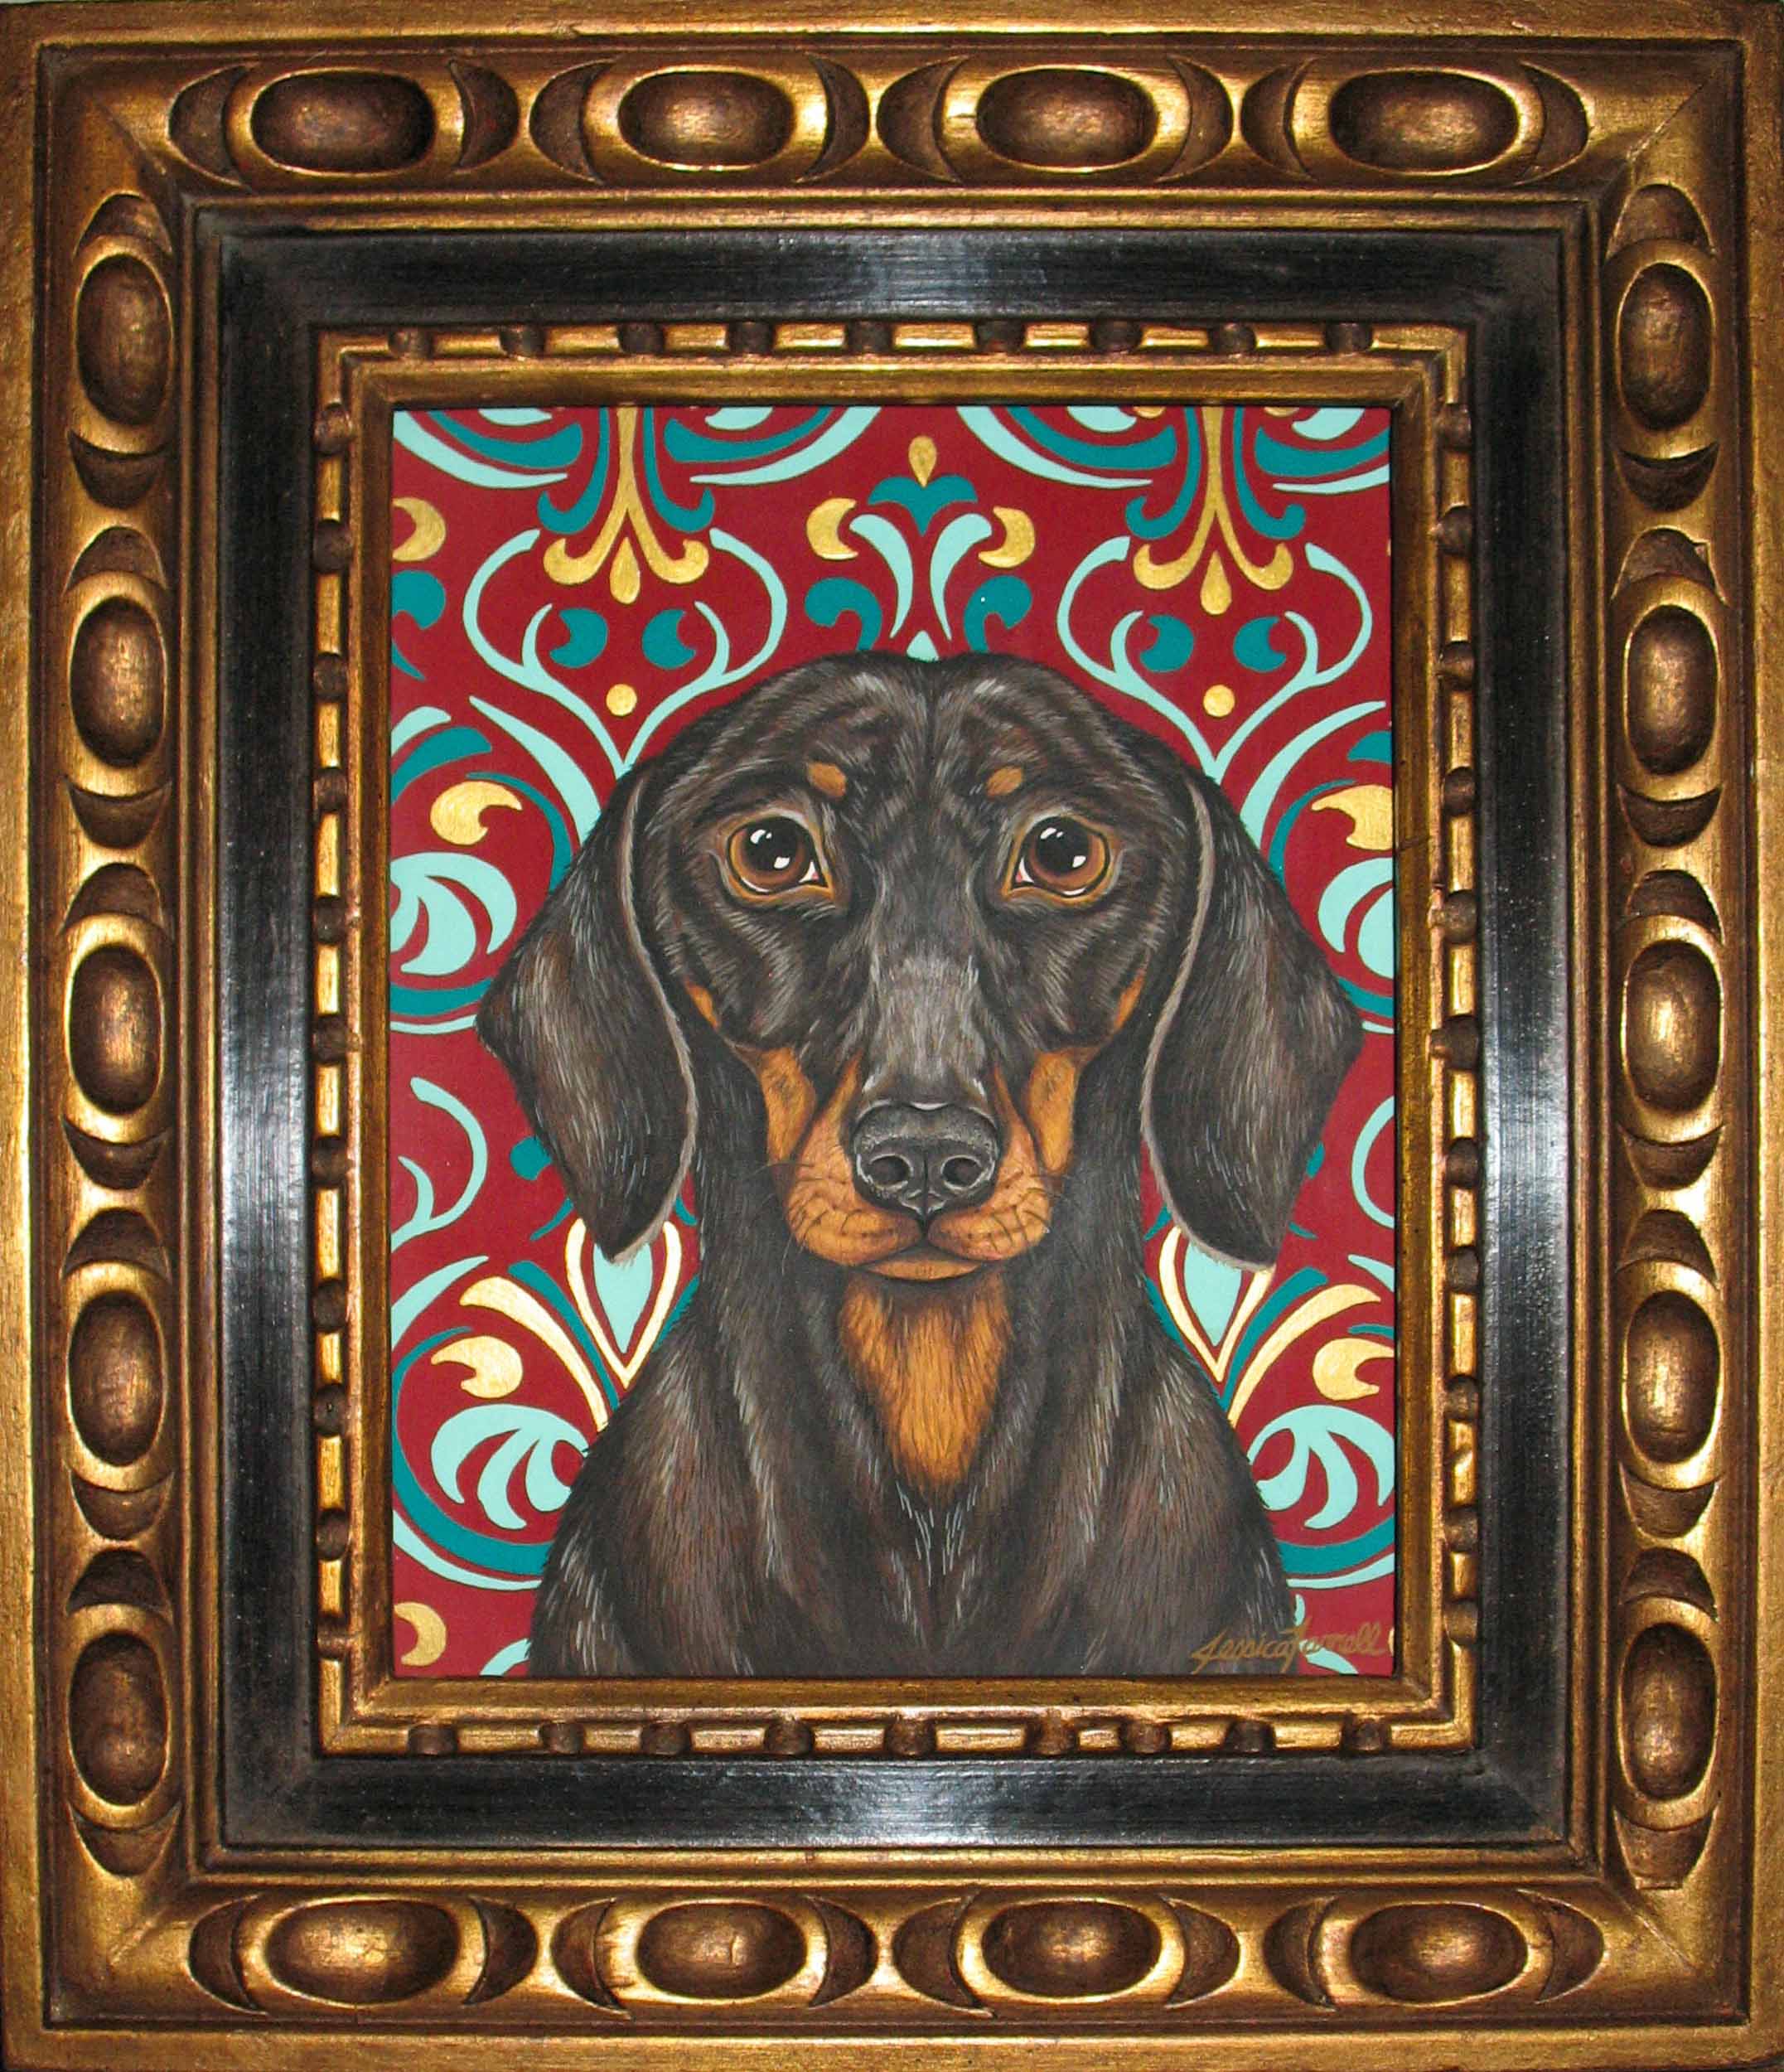   Dachshund,  Acrylic on wood  with vintage frame, 17   x 15 inches (framed)  (private collection) 